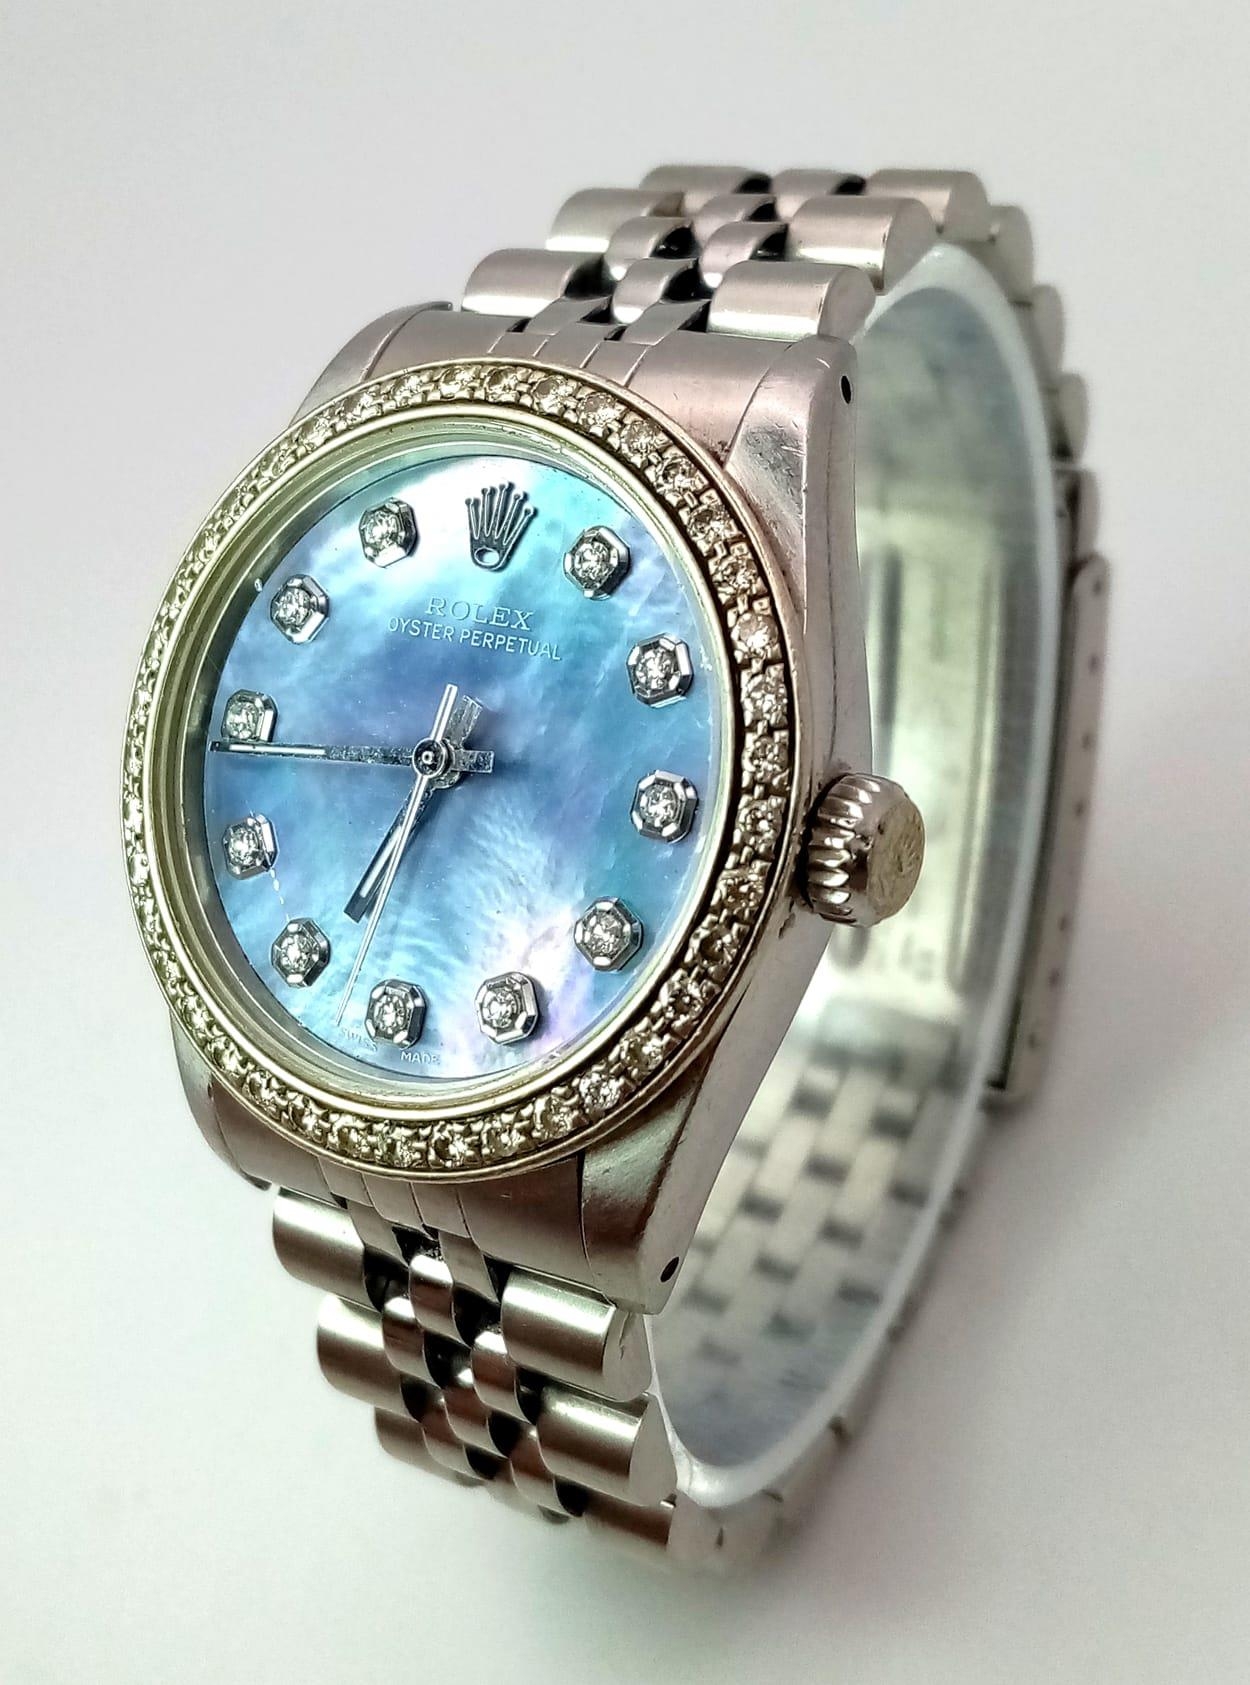 A LADIES ROLEX DRESS WATCH WITH DIAMOND NUMERALS AND BEZEL , MOTHER OF PEARL DIAL AND AUTOMATIC - Image 2 of 10